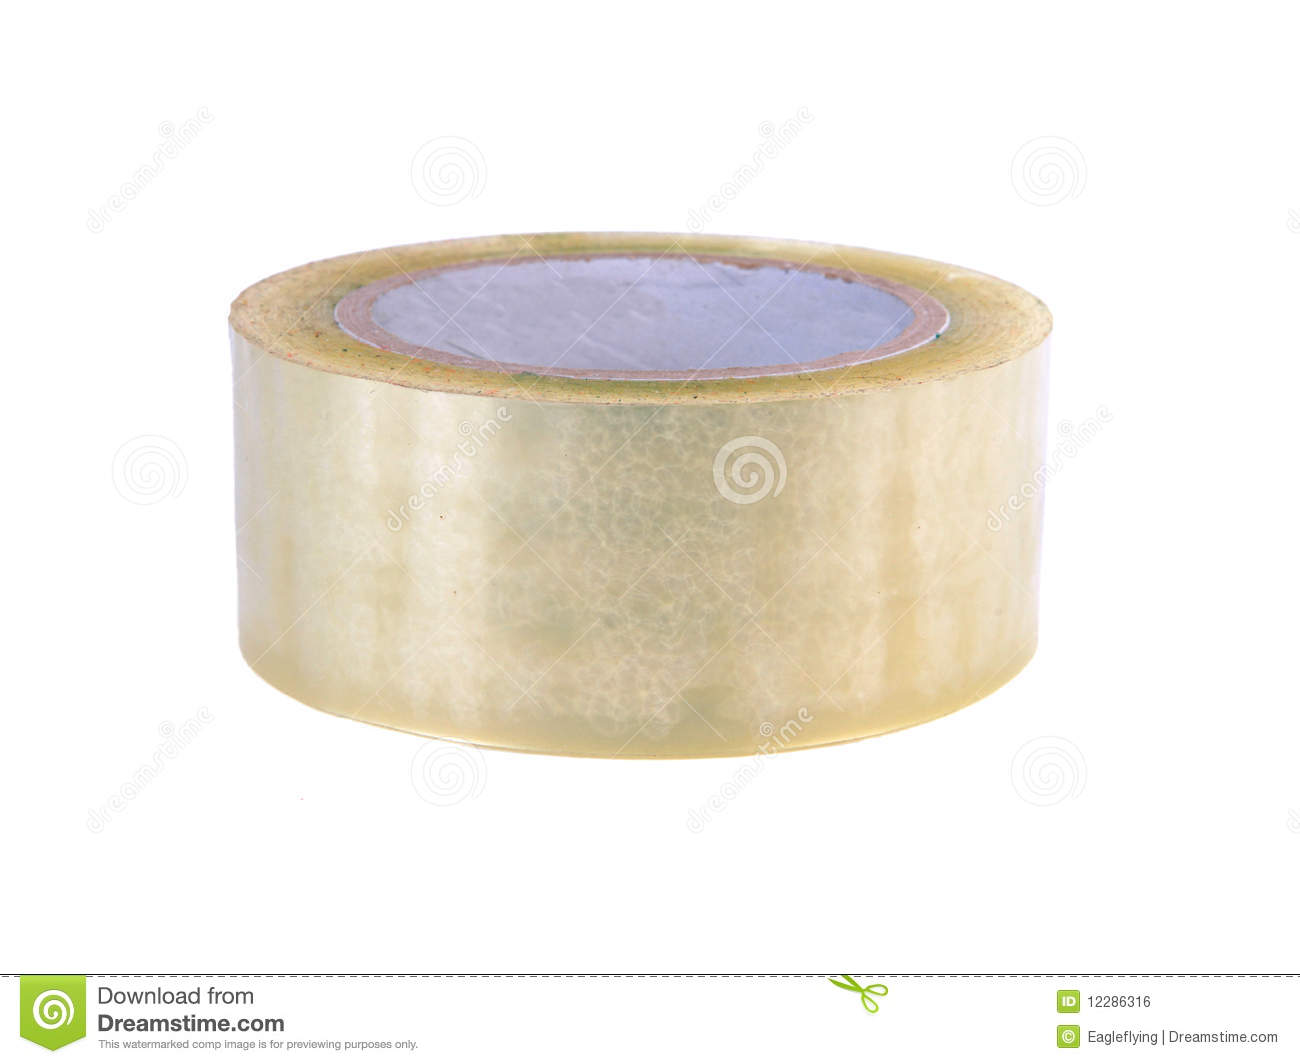 Roll Of Packing Tape Royalty Free Stock Image   Image  12286316